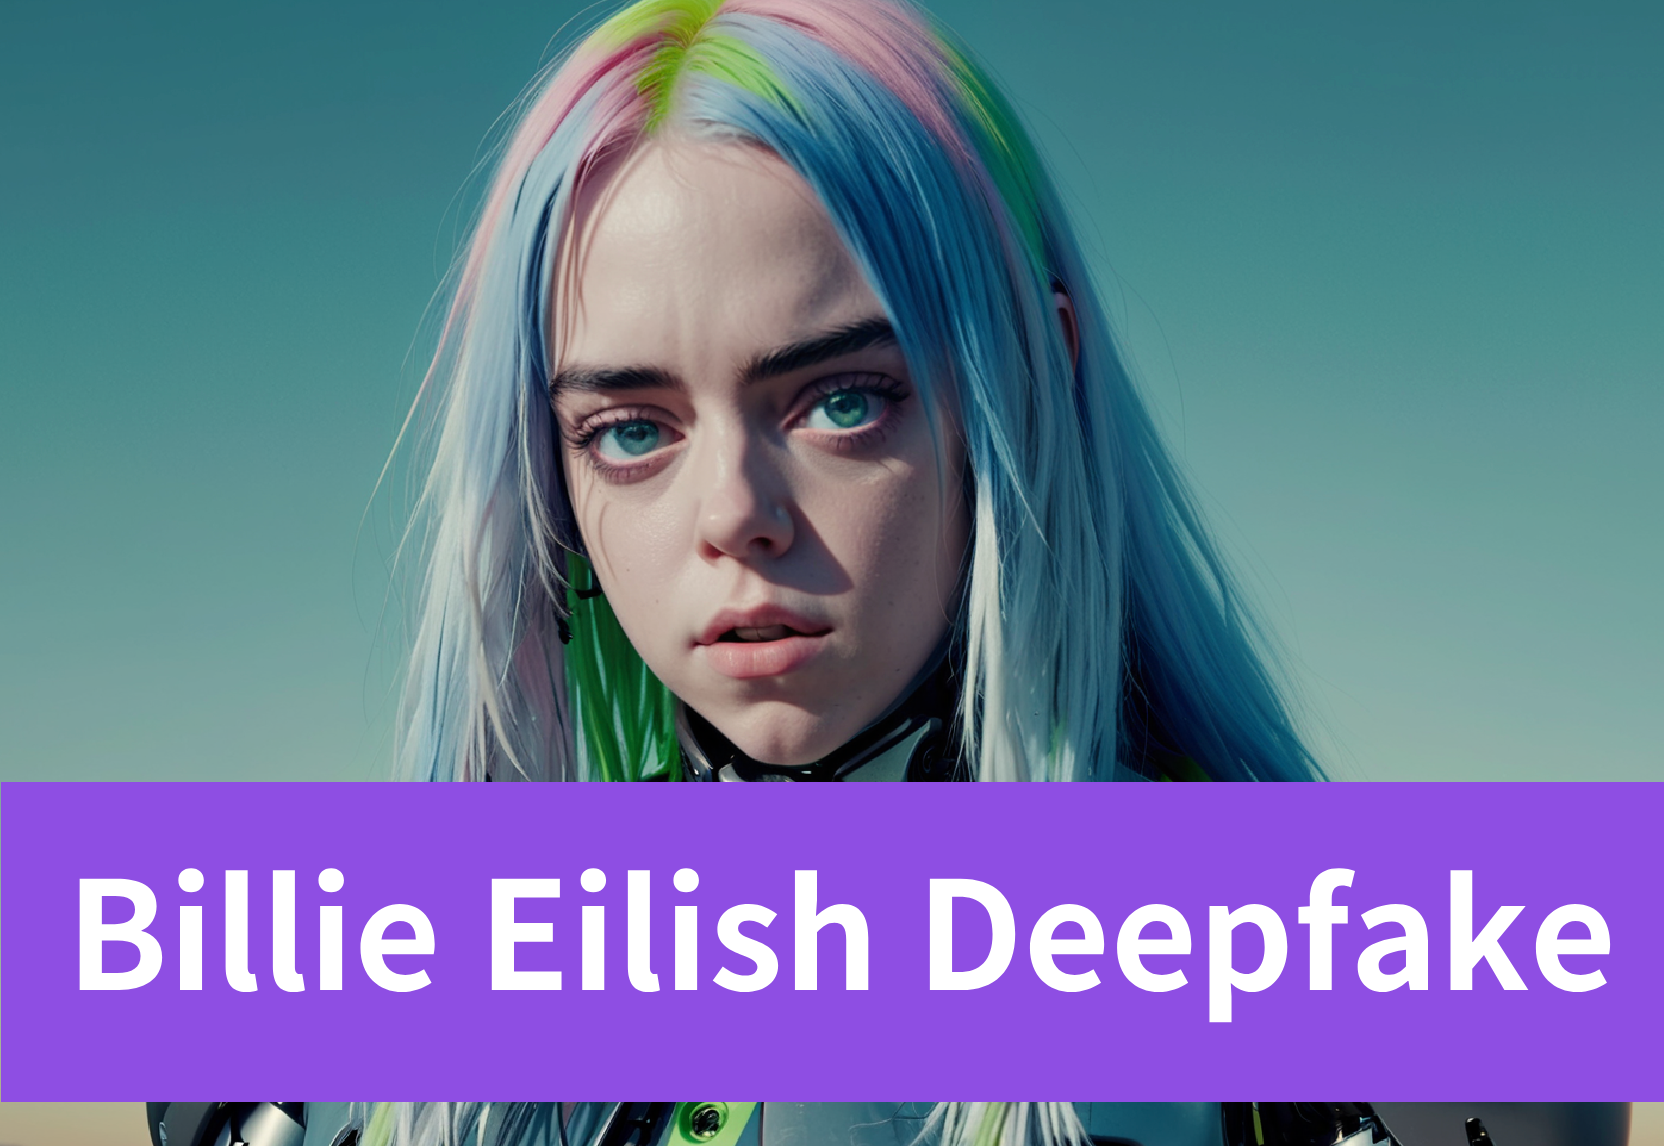 How Can You Generate a Billie Eilish Deep Fake Using AI Techniques?